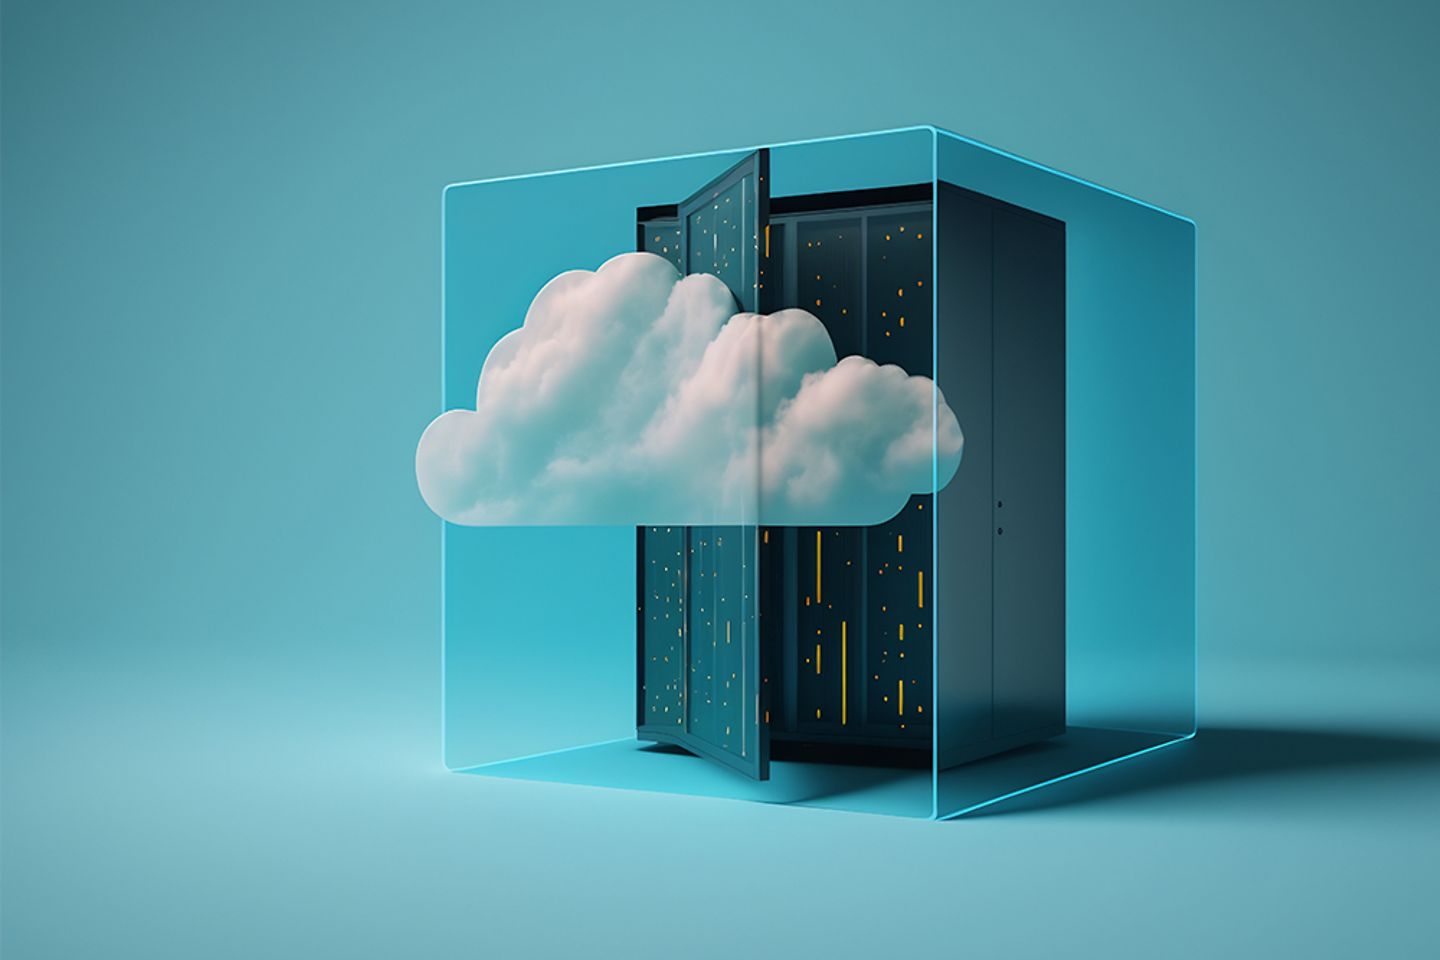 Graphic of a server rack and a cloud in a glass container